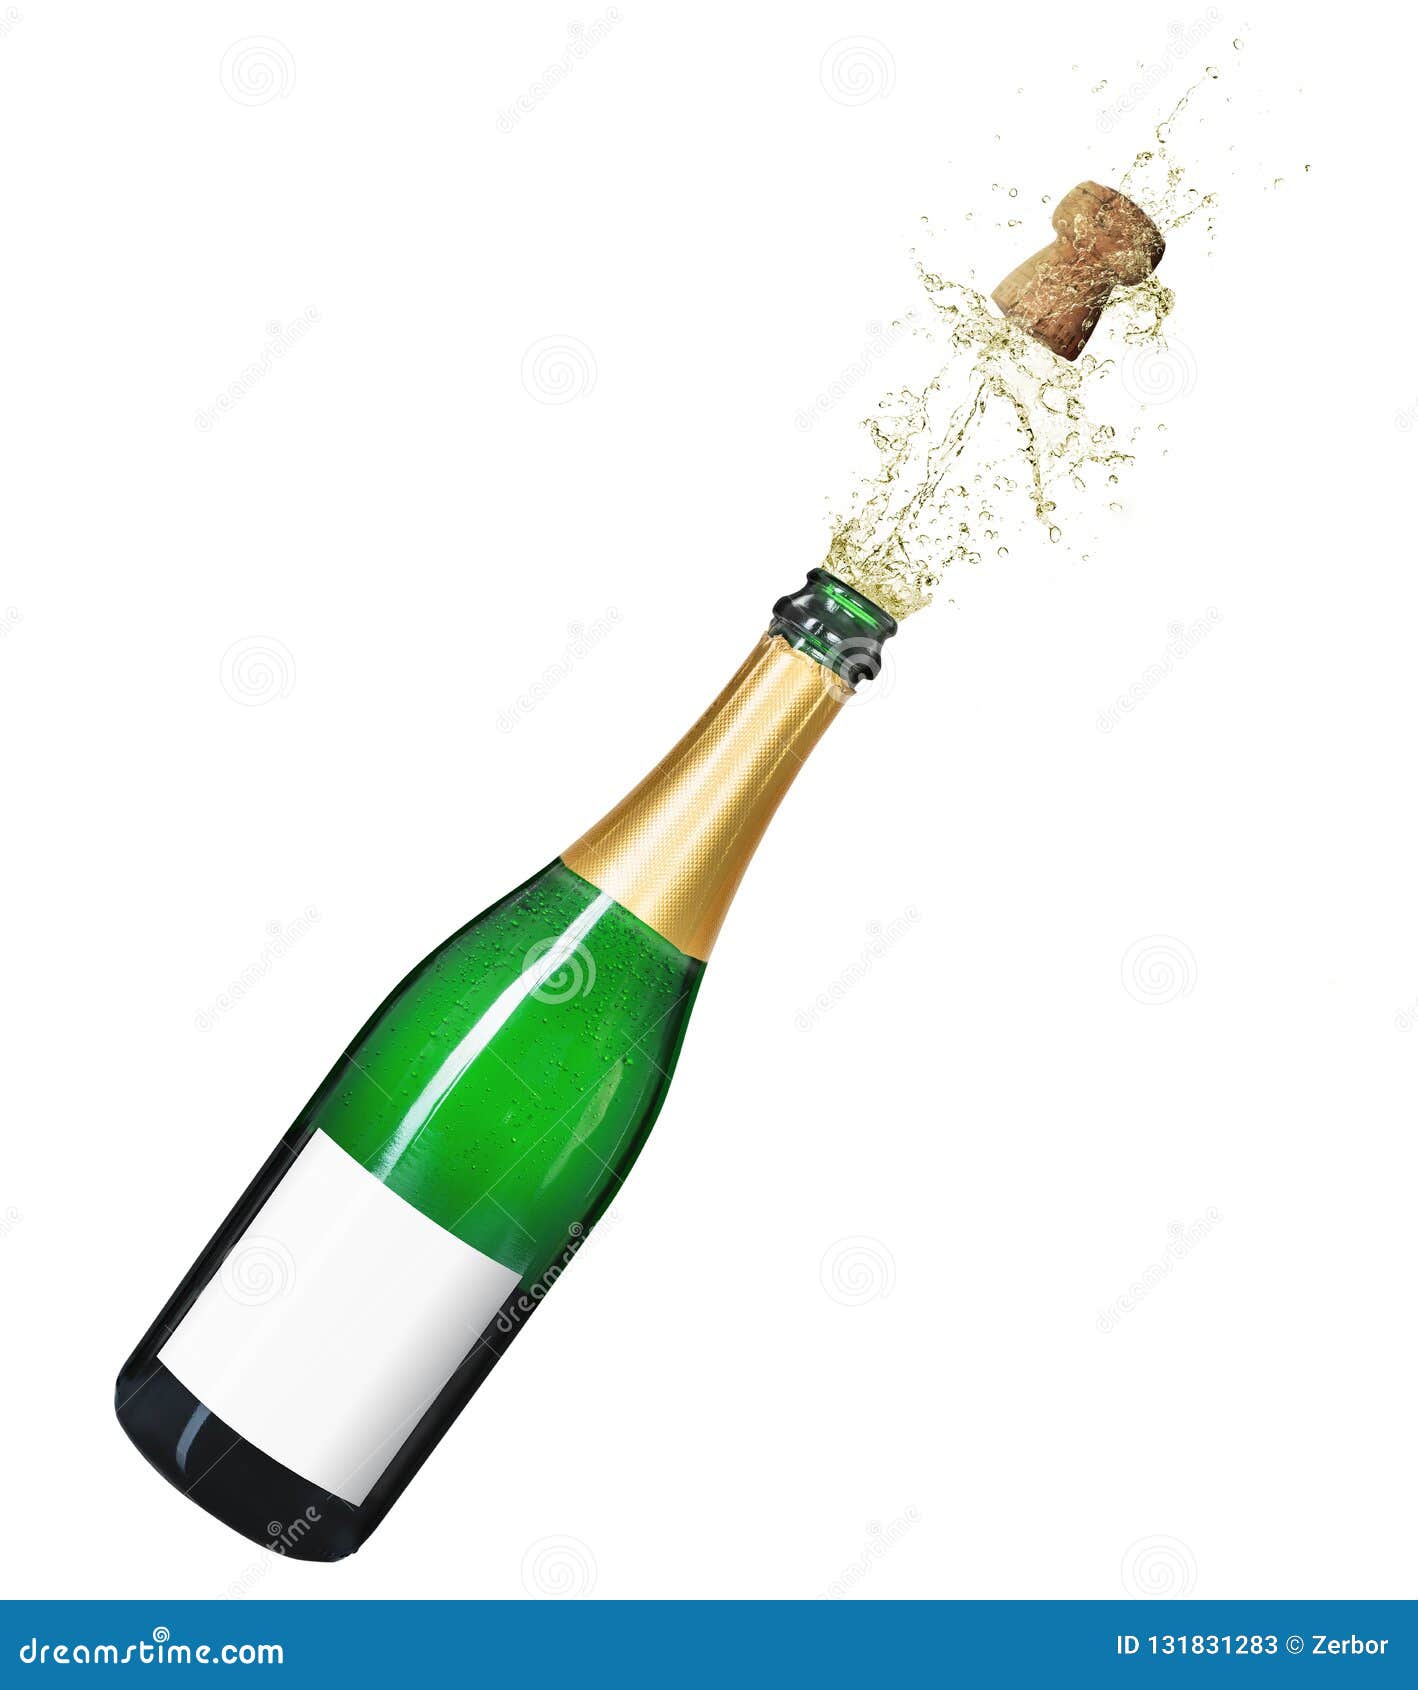 Three Blank Champagne Bottles Isolated On White Stock Photo